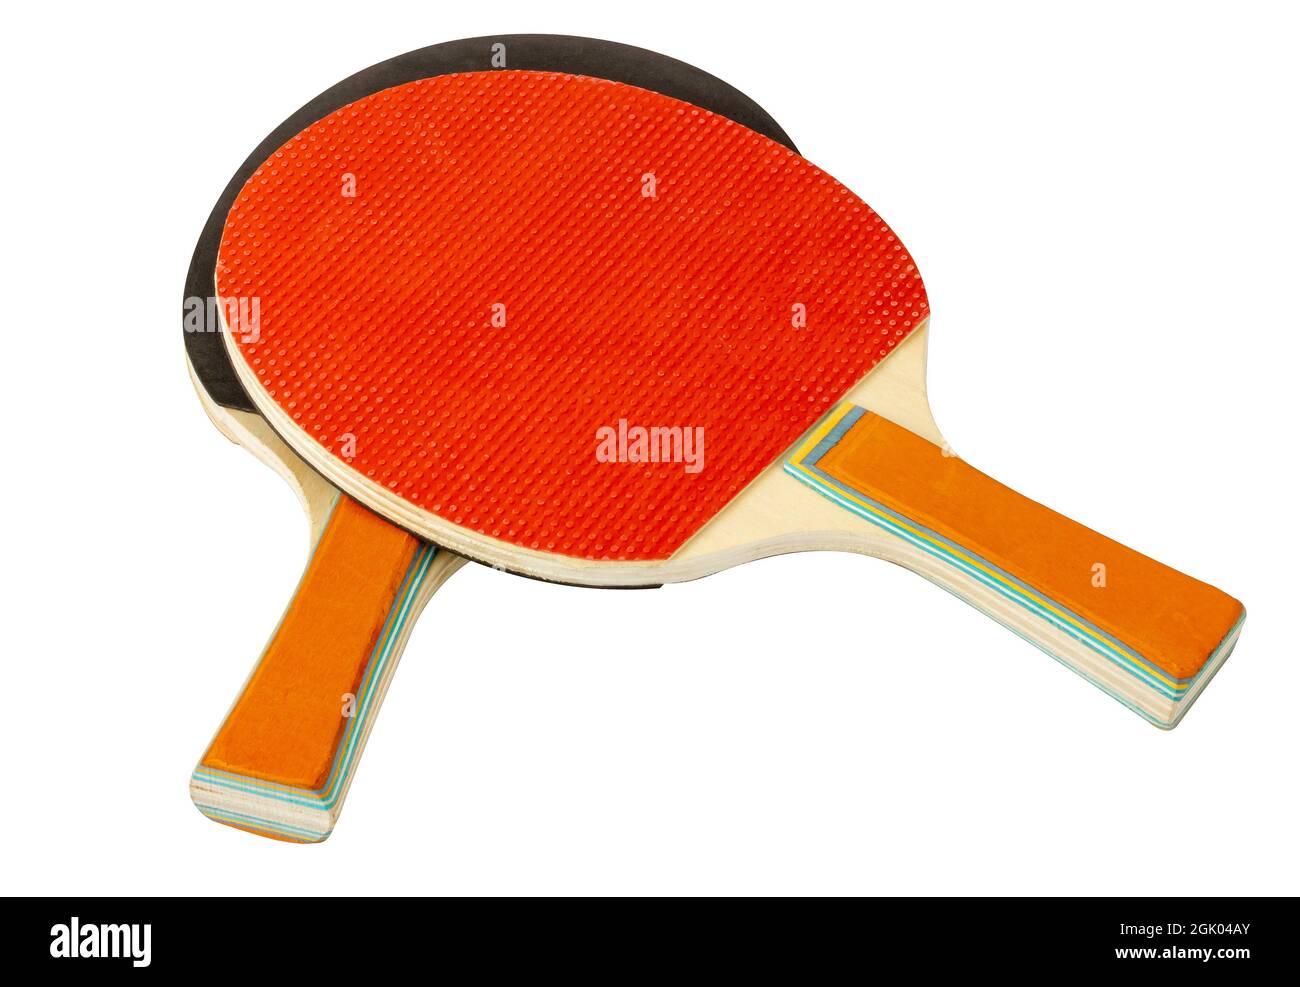 Two ping pong rackets. Wooden rackets. High viewing angle. Isolate on white. Stock Photo